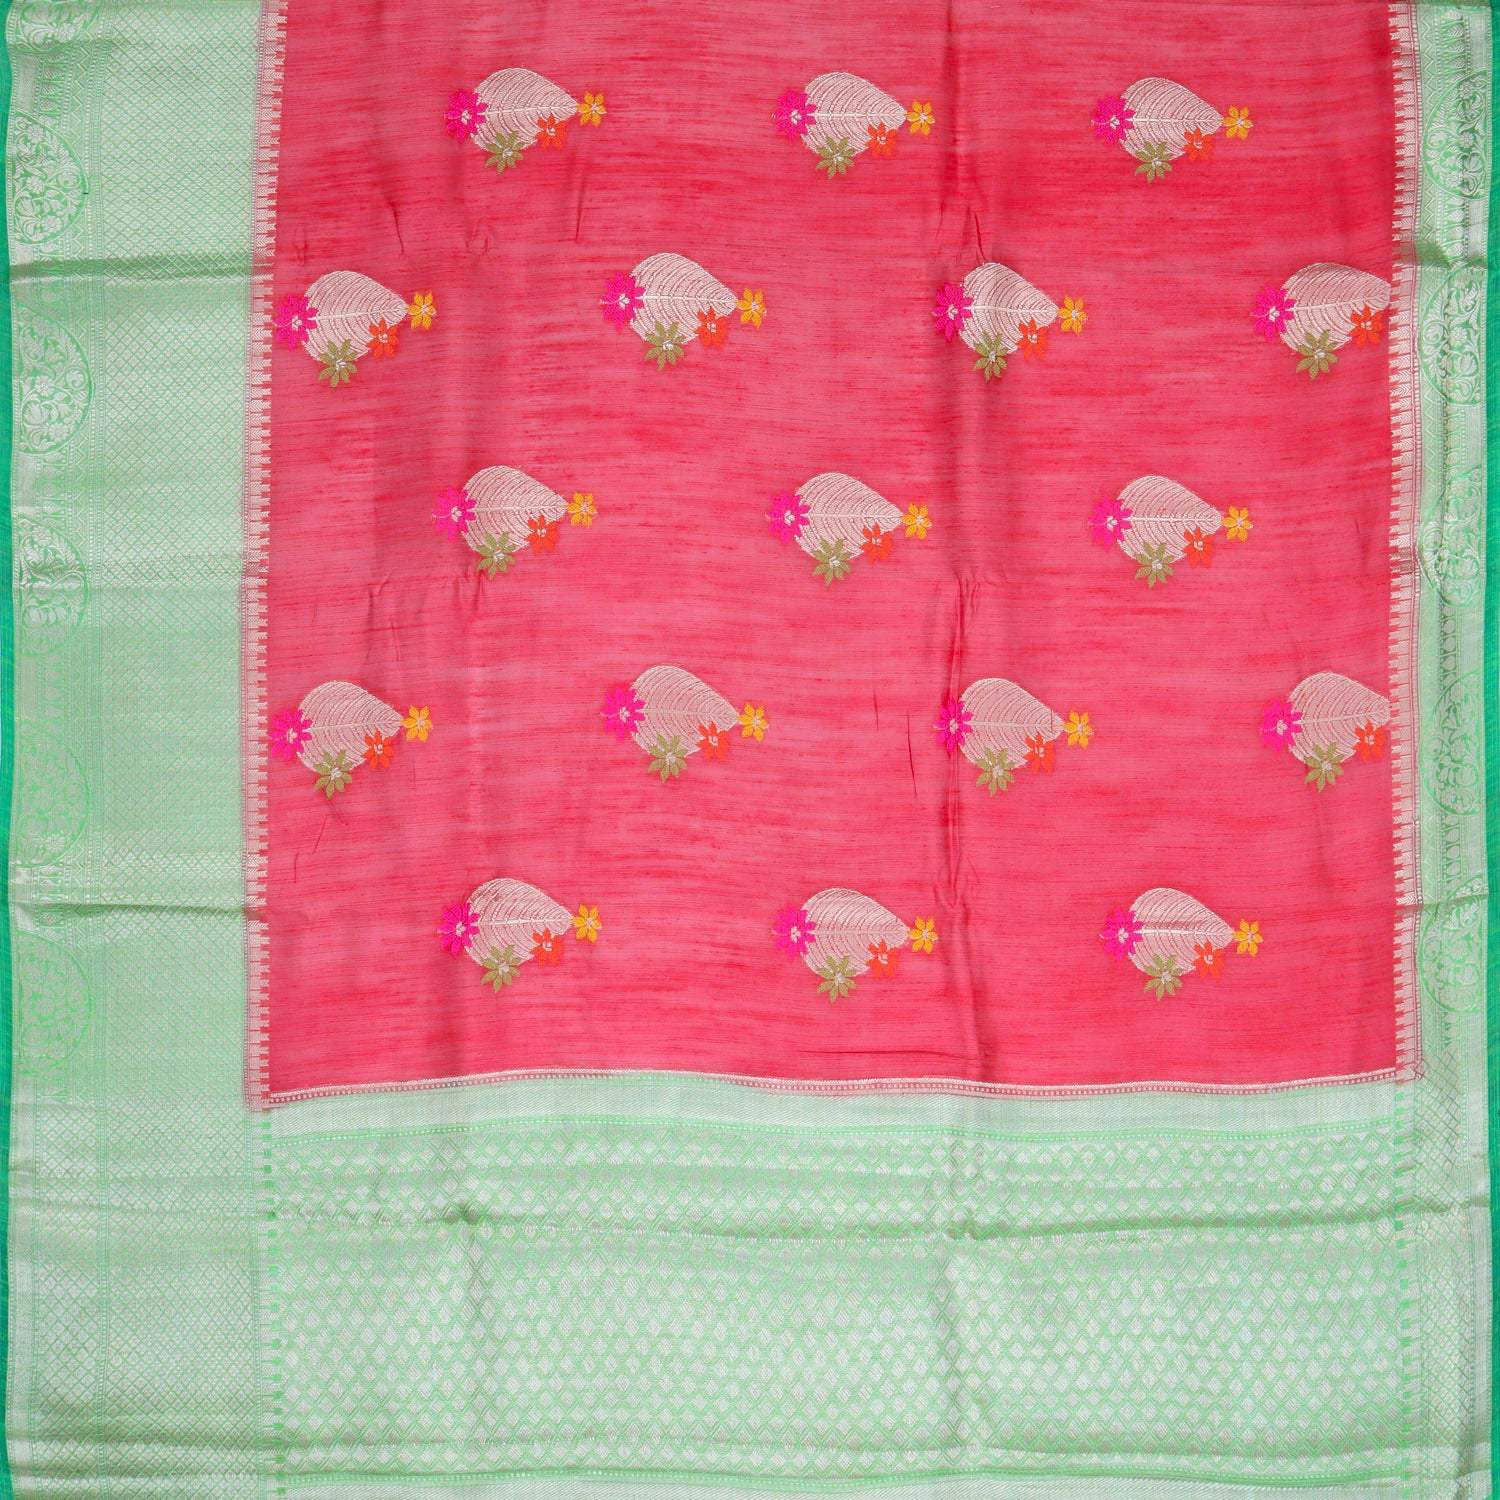 Desire Red Matka Silk Saree With Leaf Motifs - Singhania's